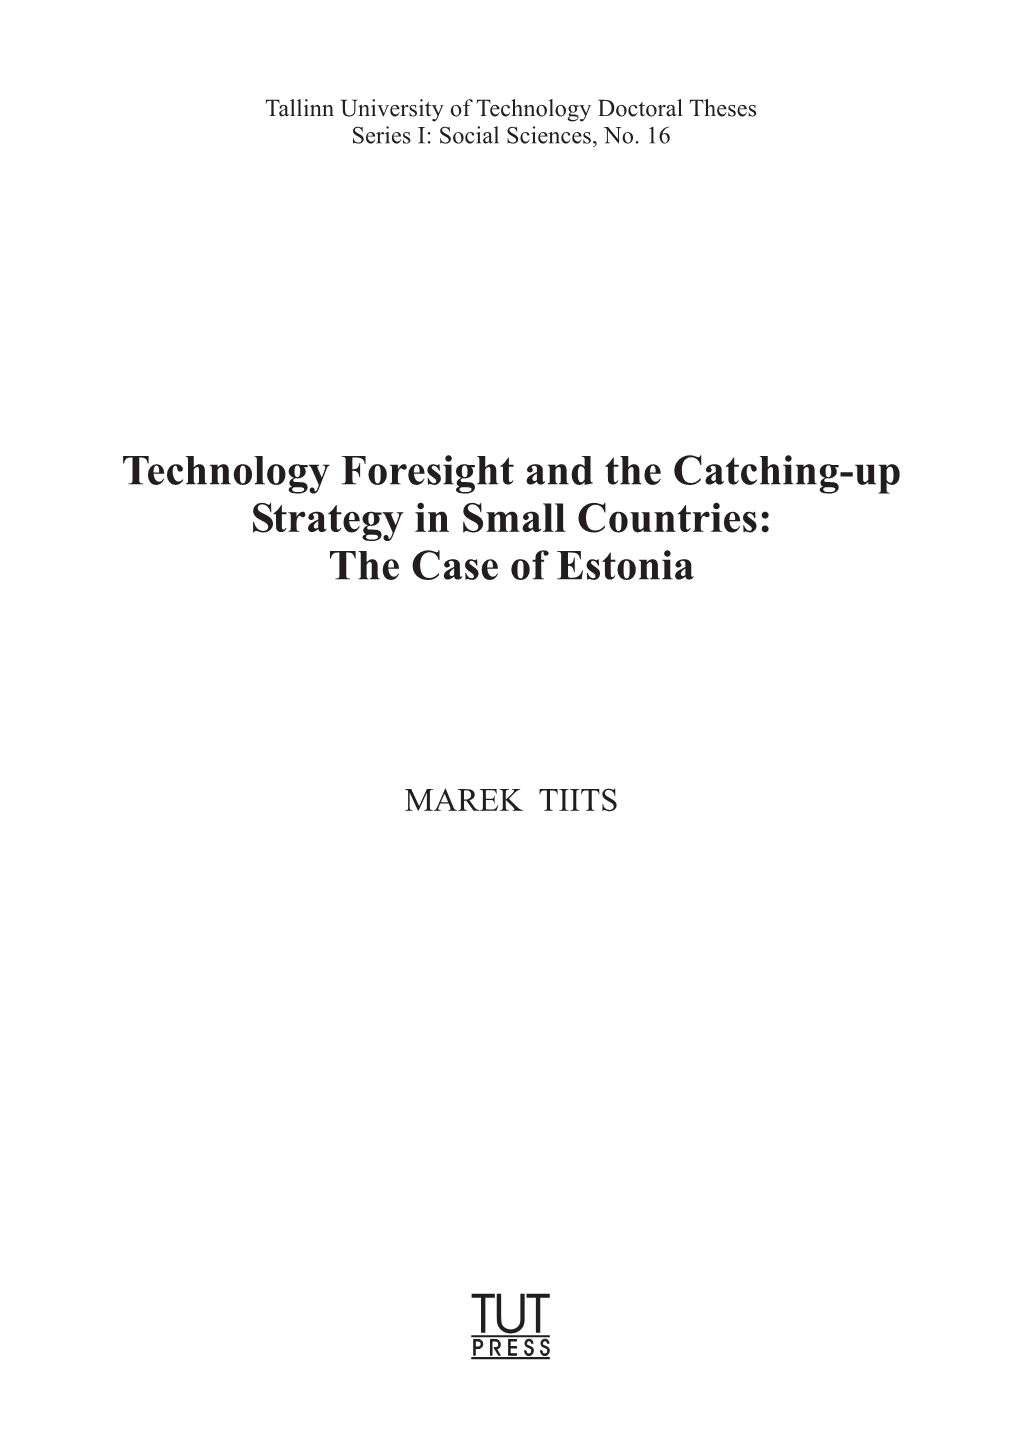 Technology Foresight and the Catching-Up Strategy in Small Countries: the Case of Estonia